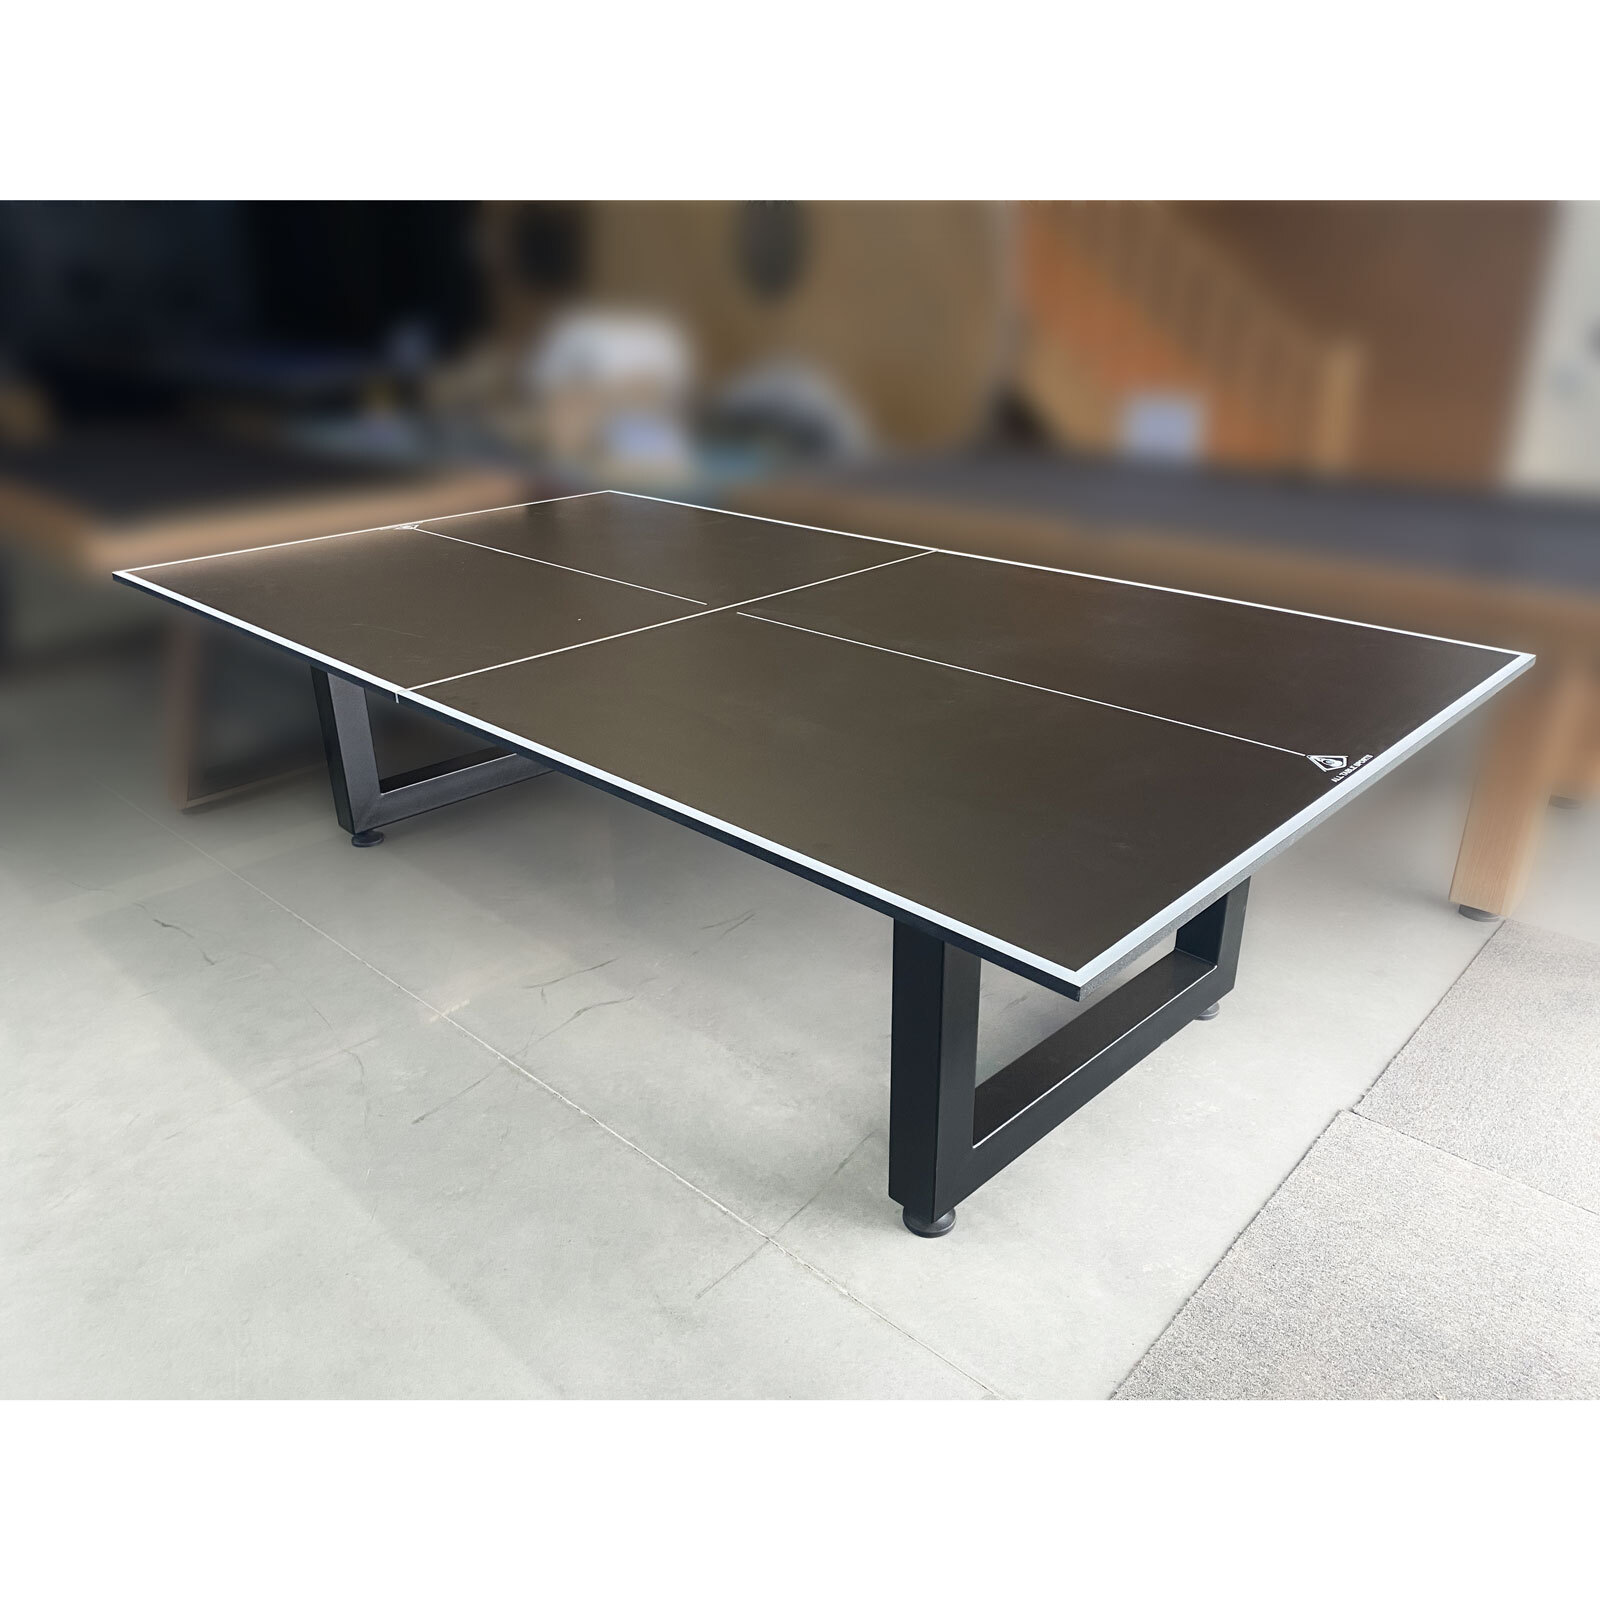 Dual function table tennis / dining top